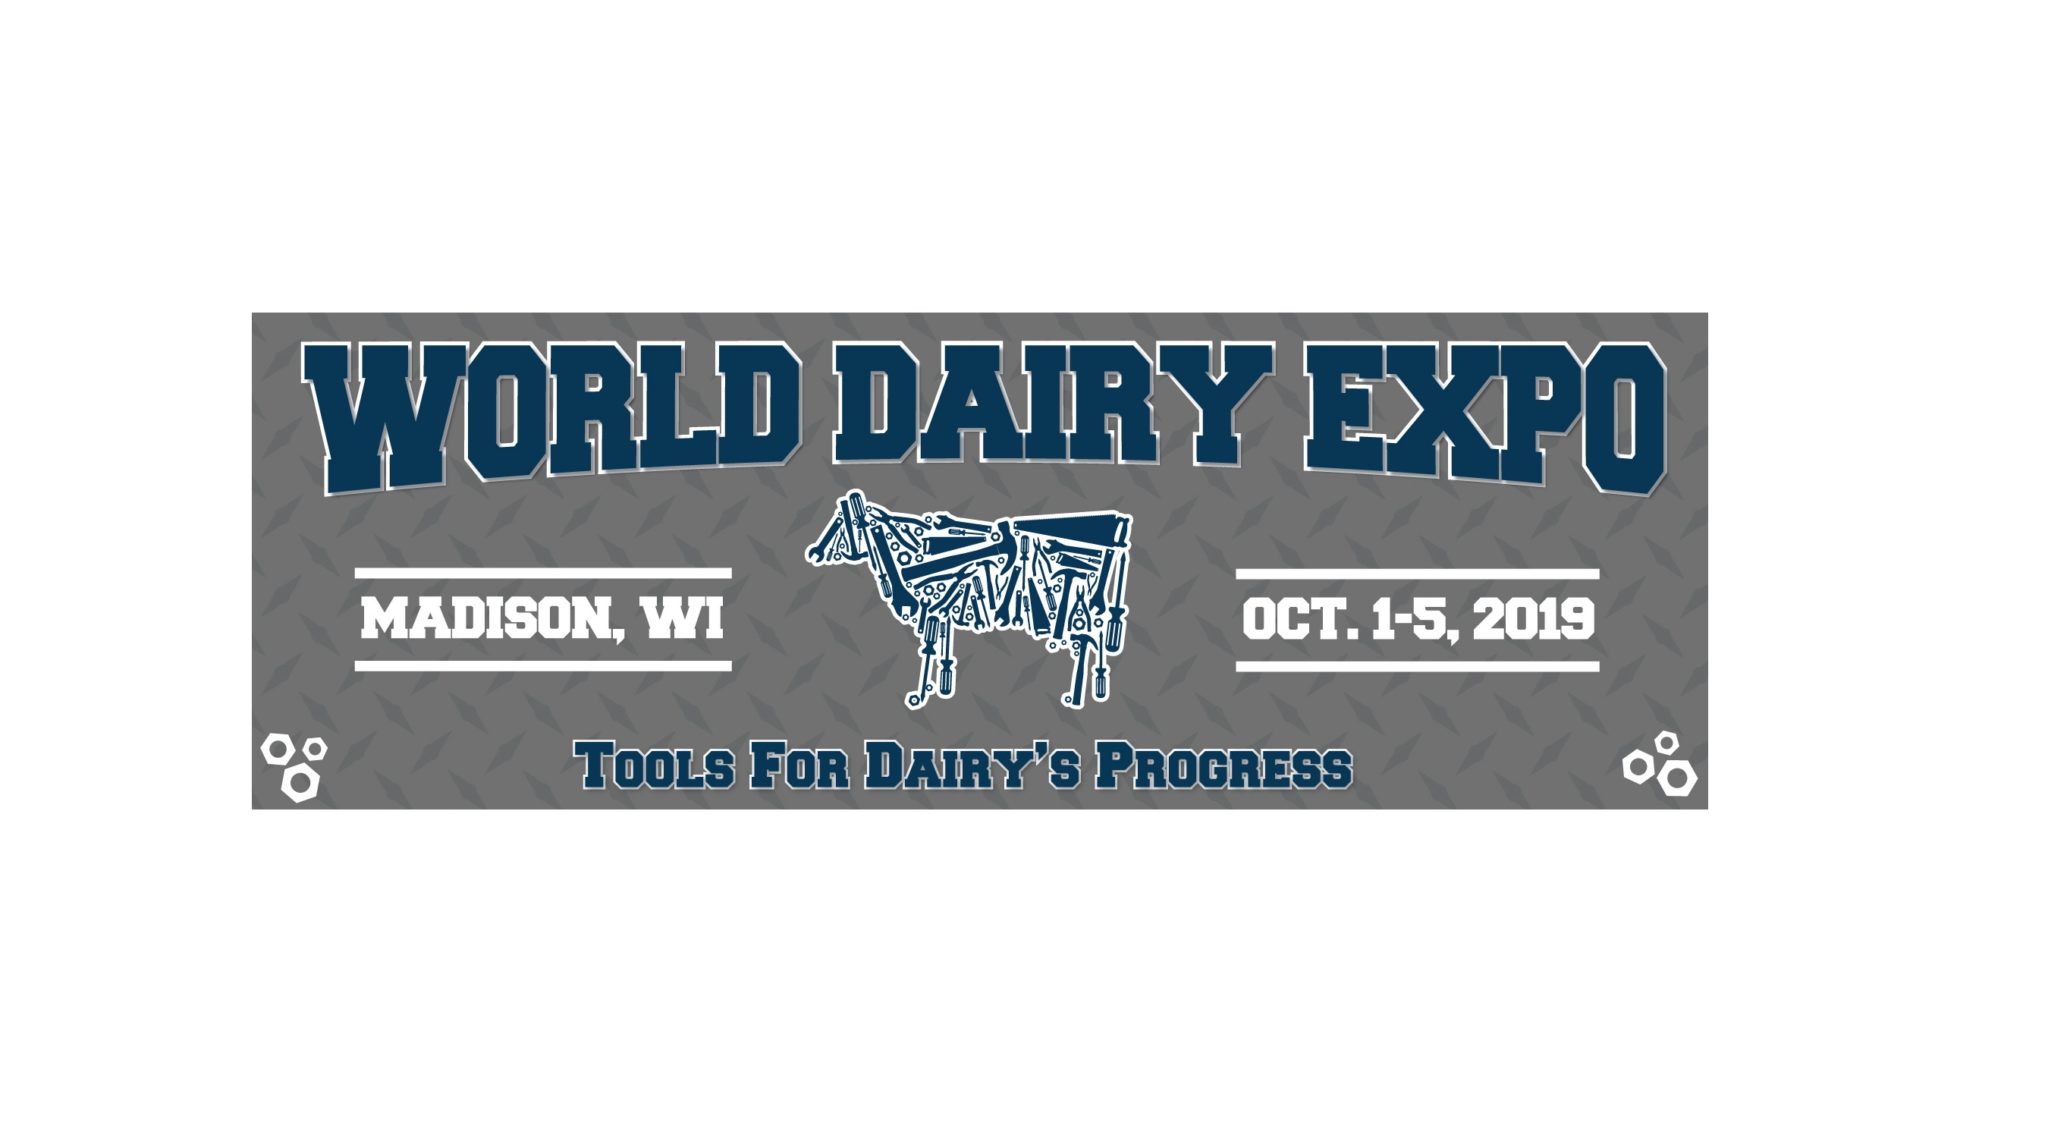 world dairy expo 20167 madison wis results